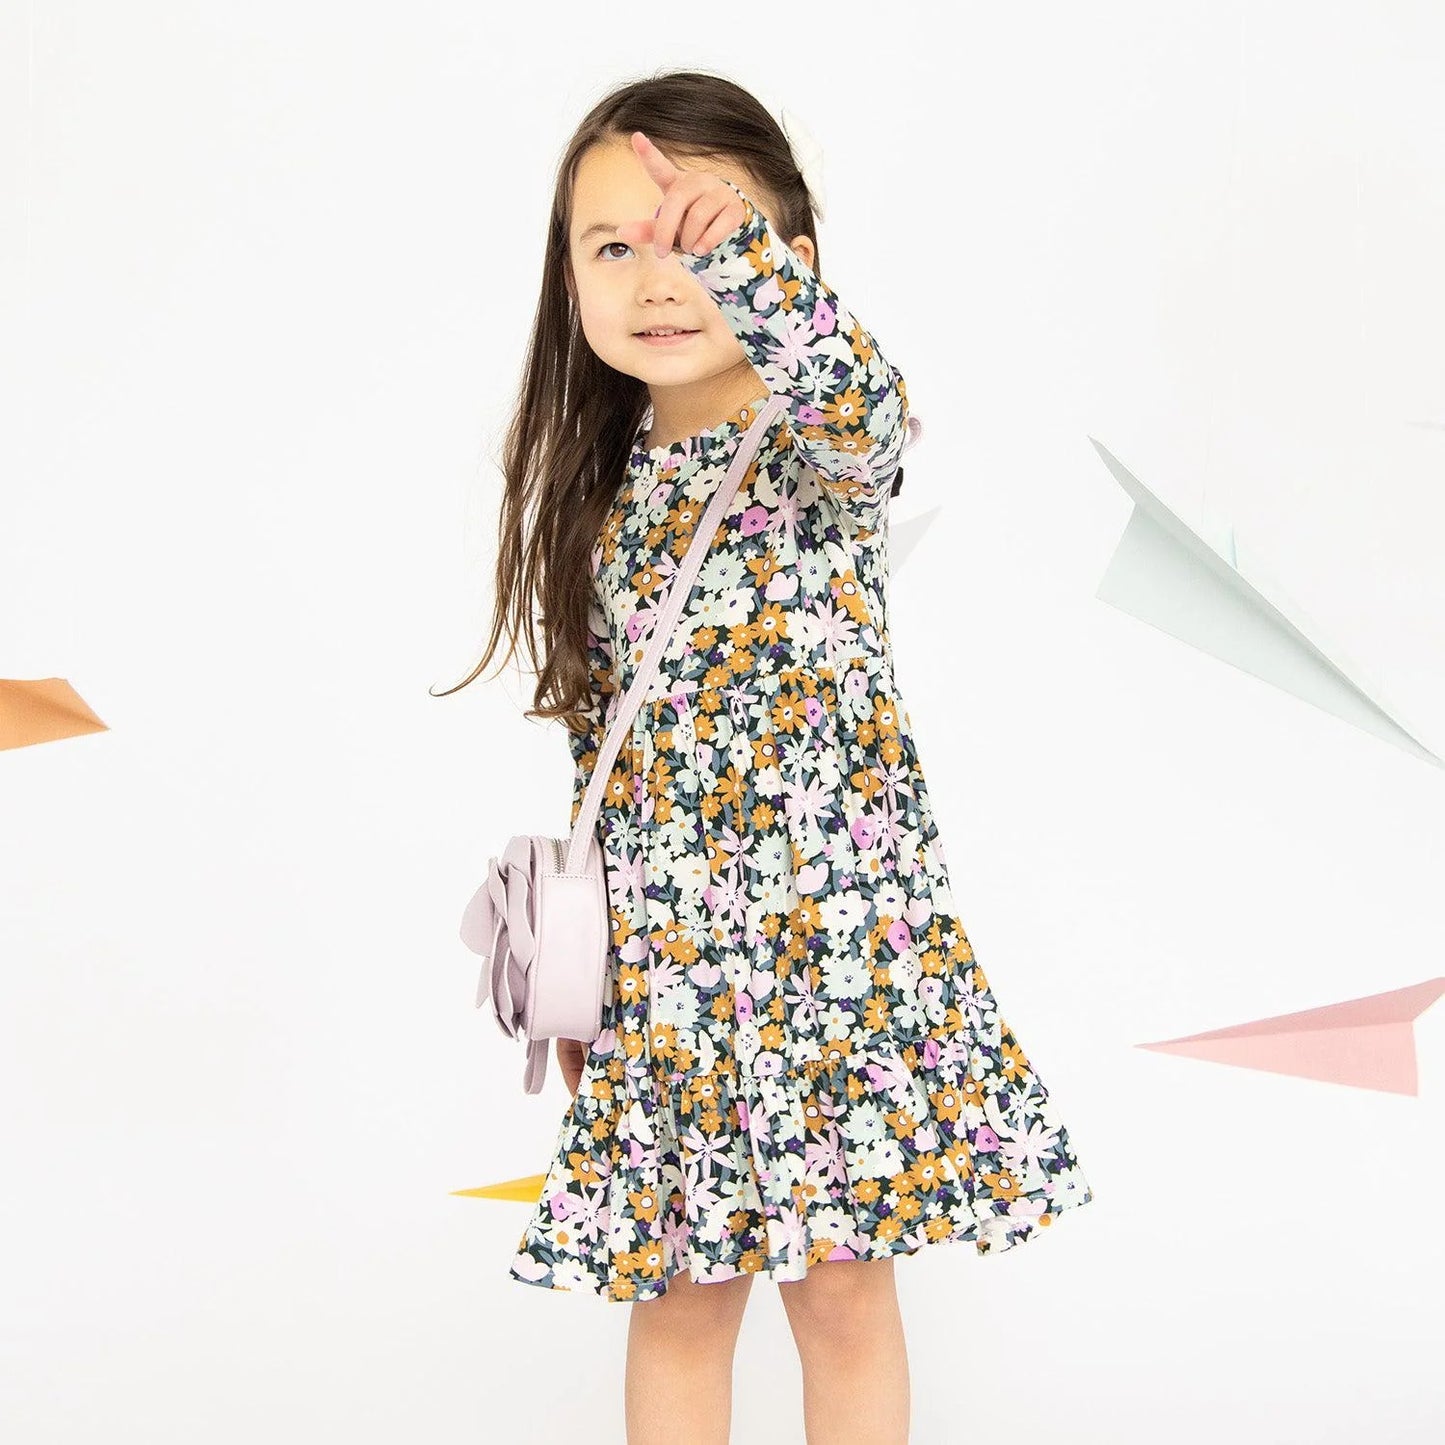 Magnetic Me - Finchley Toddler Dress